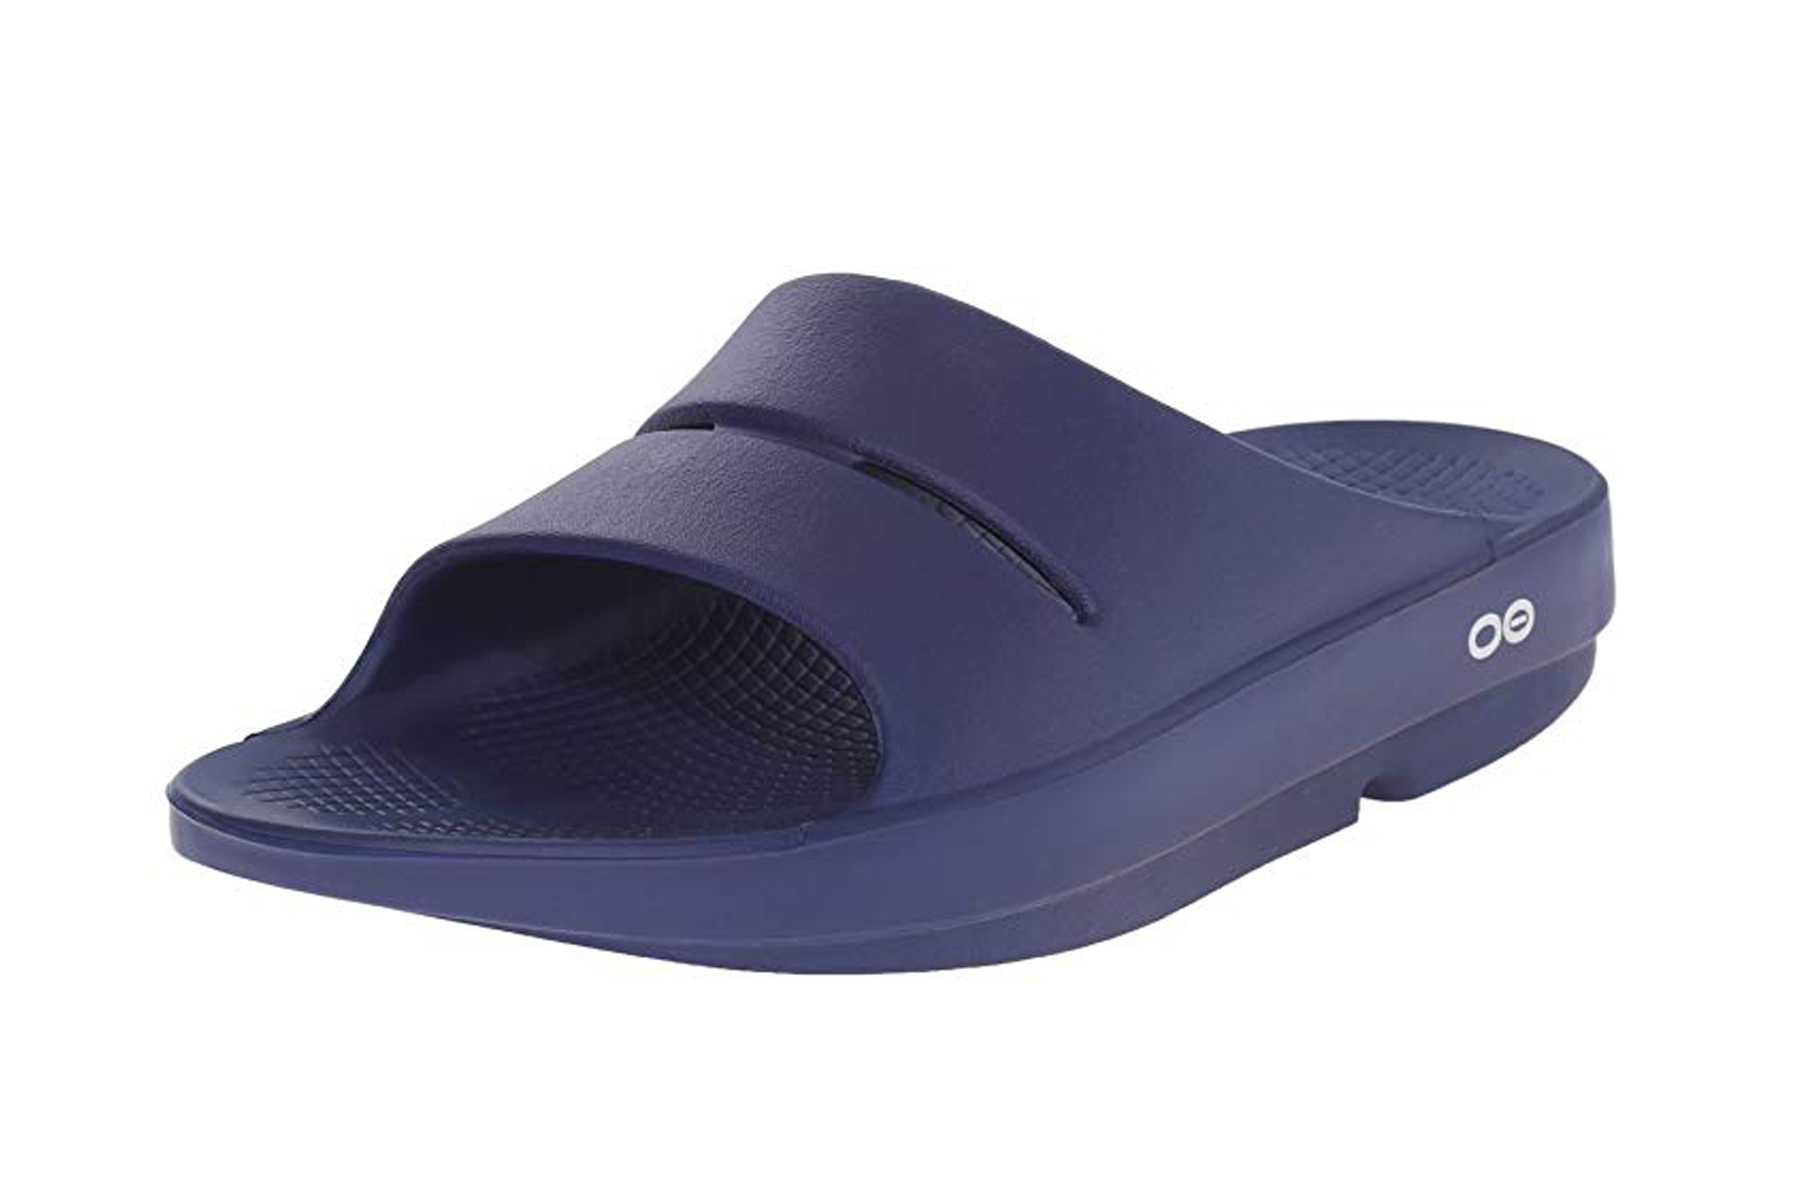 Best Orthotic Sandals for Women Over 50 That Are Super Cute